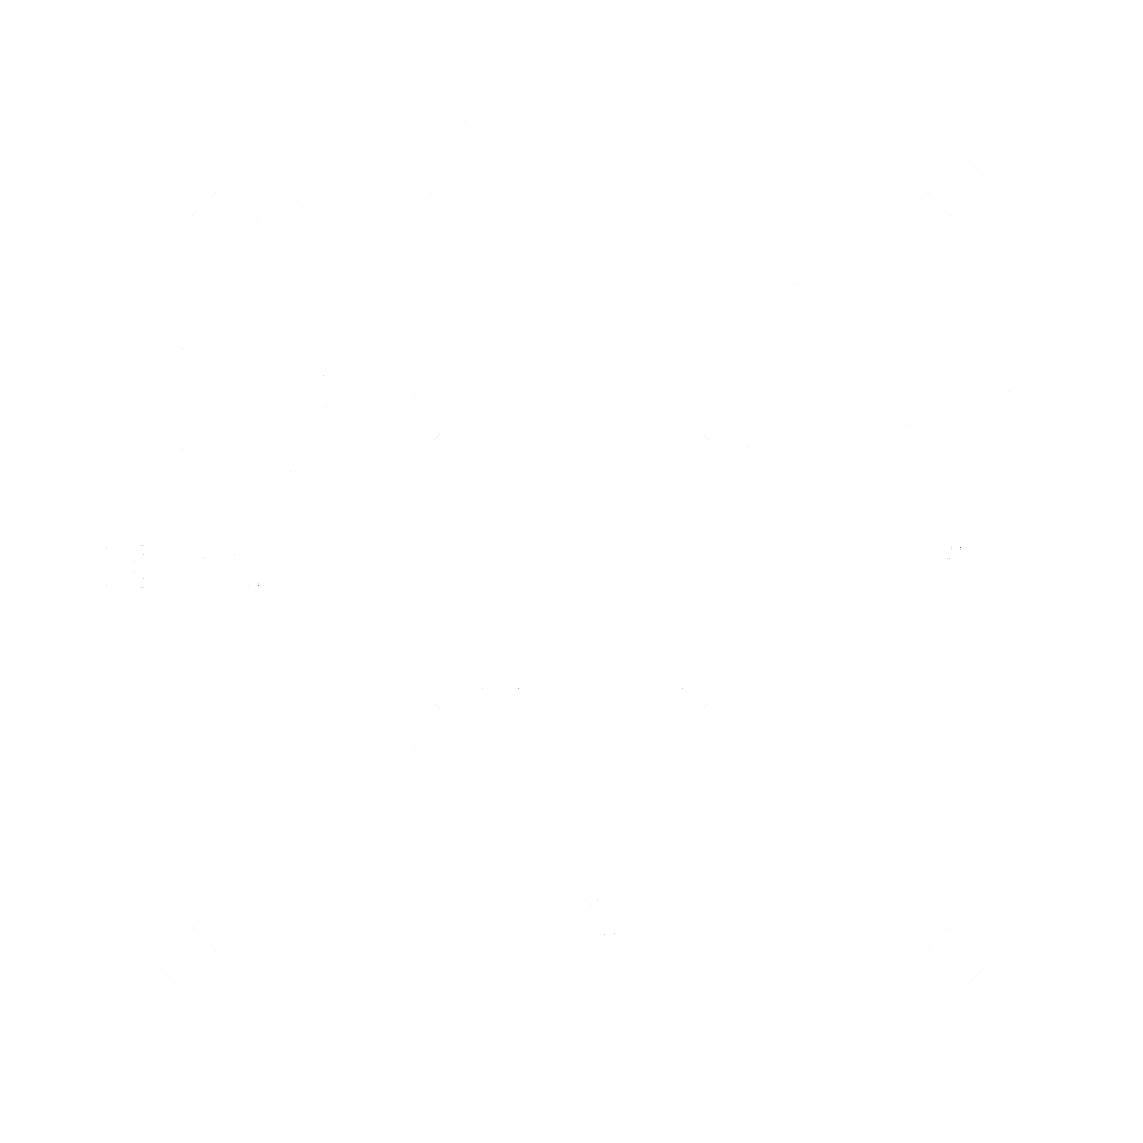 Country Road Ice House White Text Inside Circle Outline With 